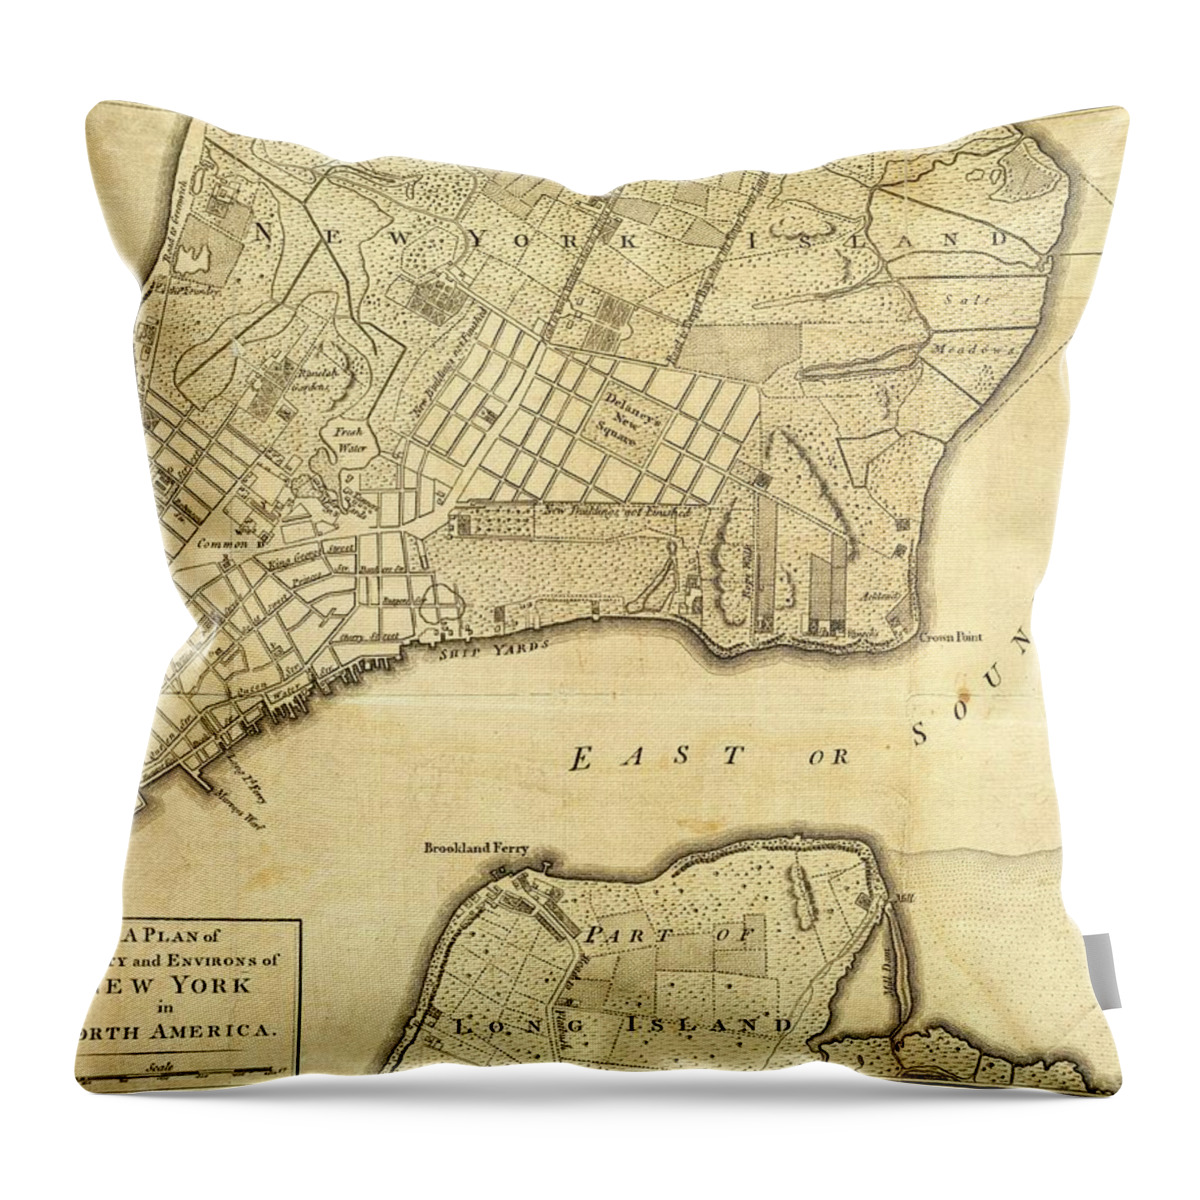 Antique New York Map Throw Pillow featuring the drawing Antique Maps - Old Cartographic maps - City of New York and its Environs by Studio Grafiikka